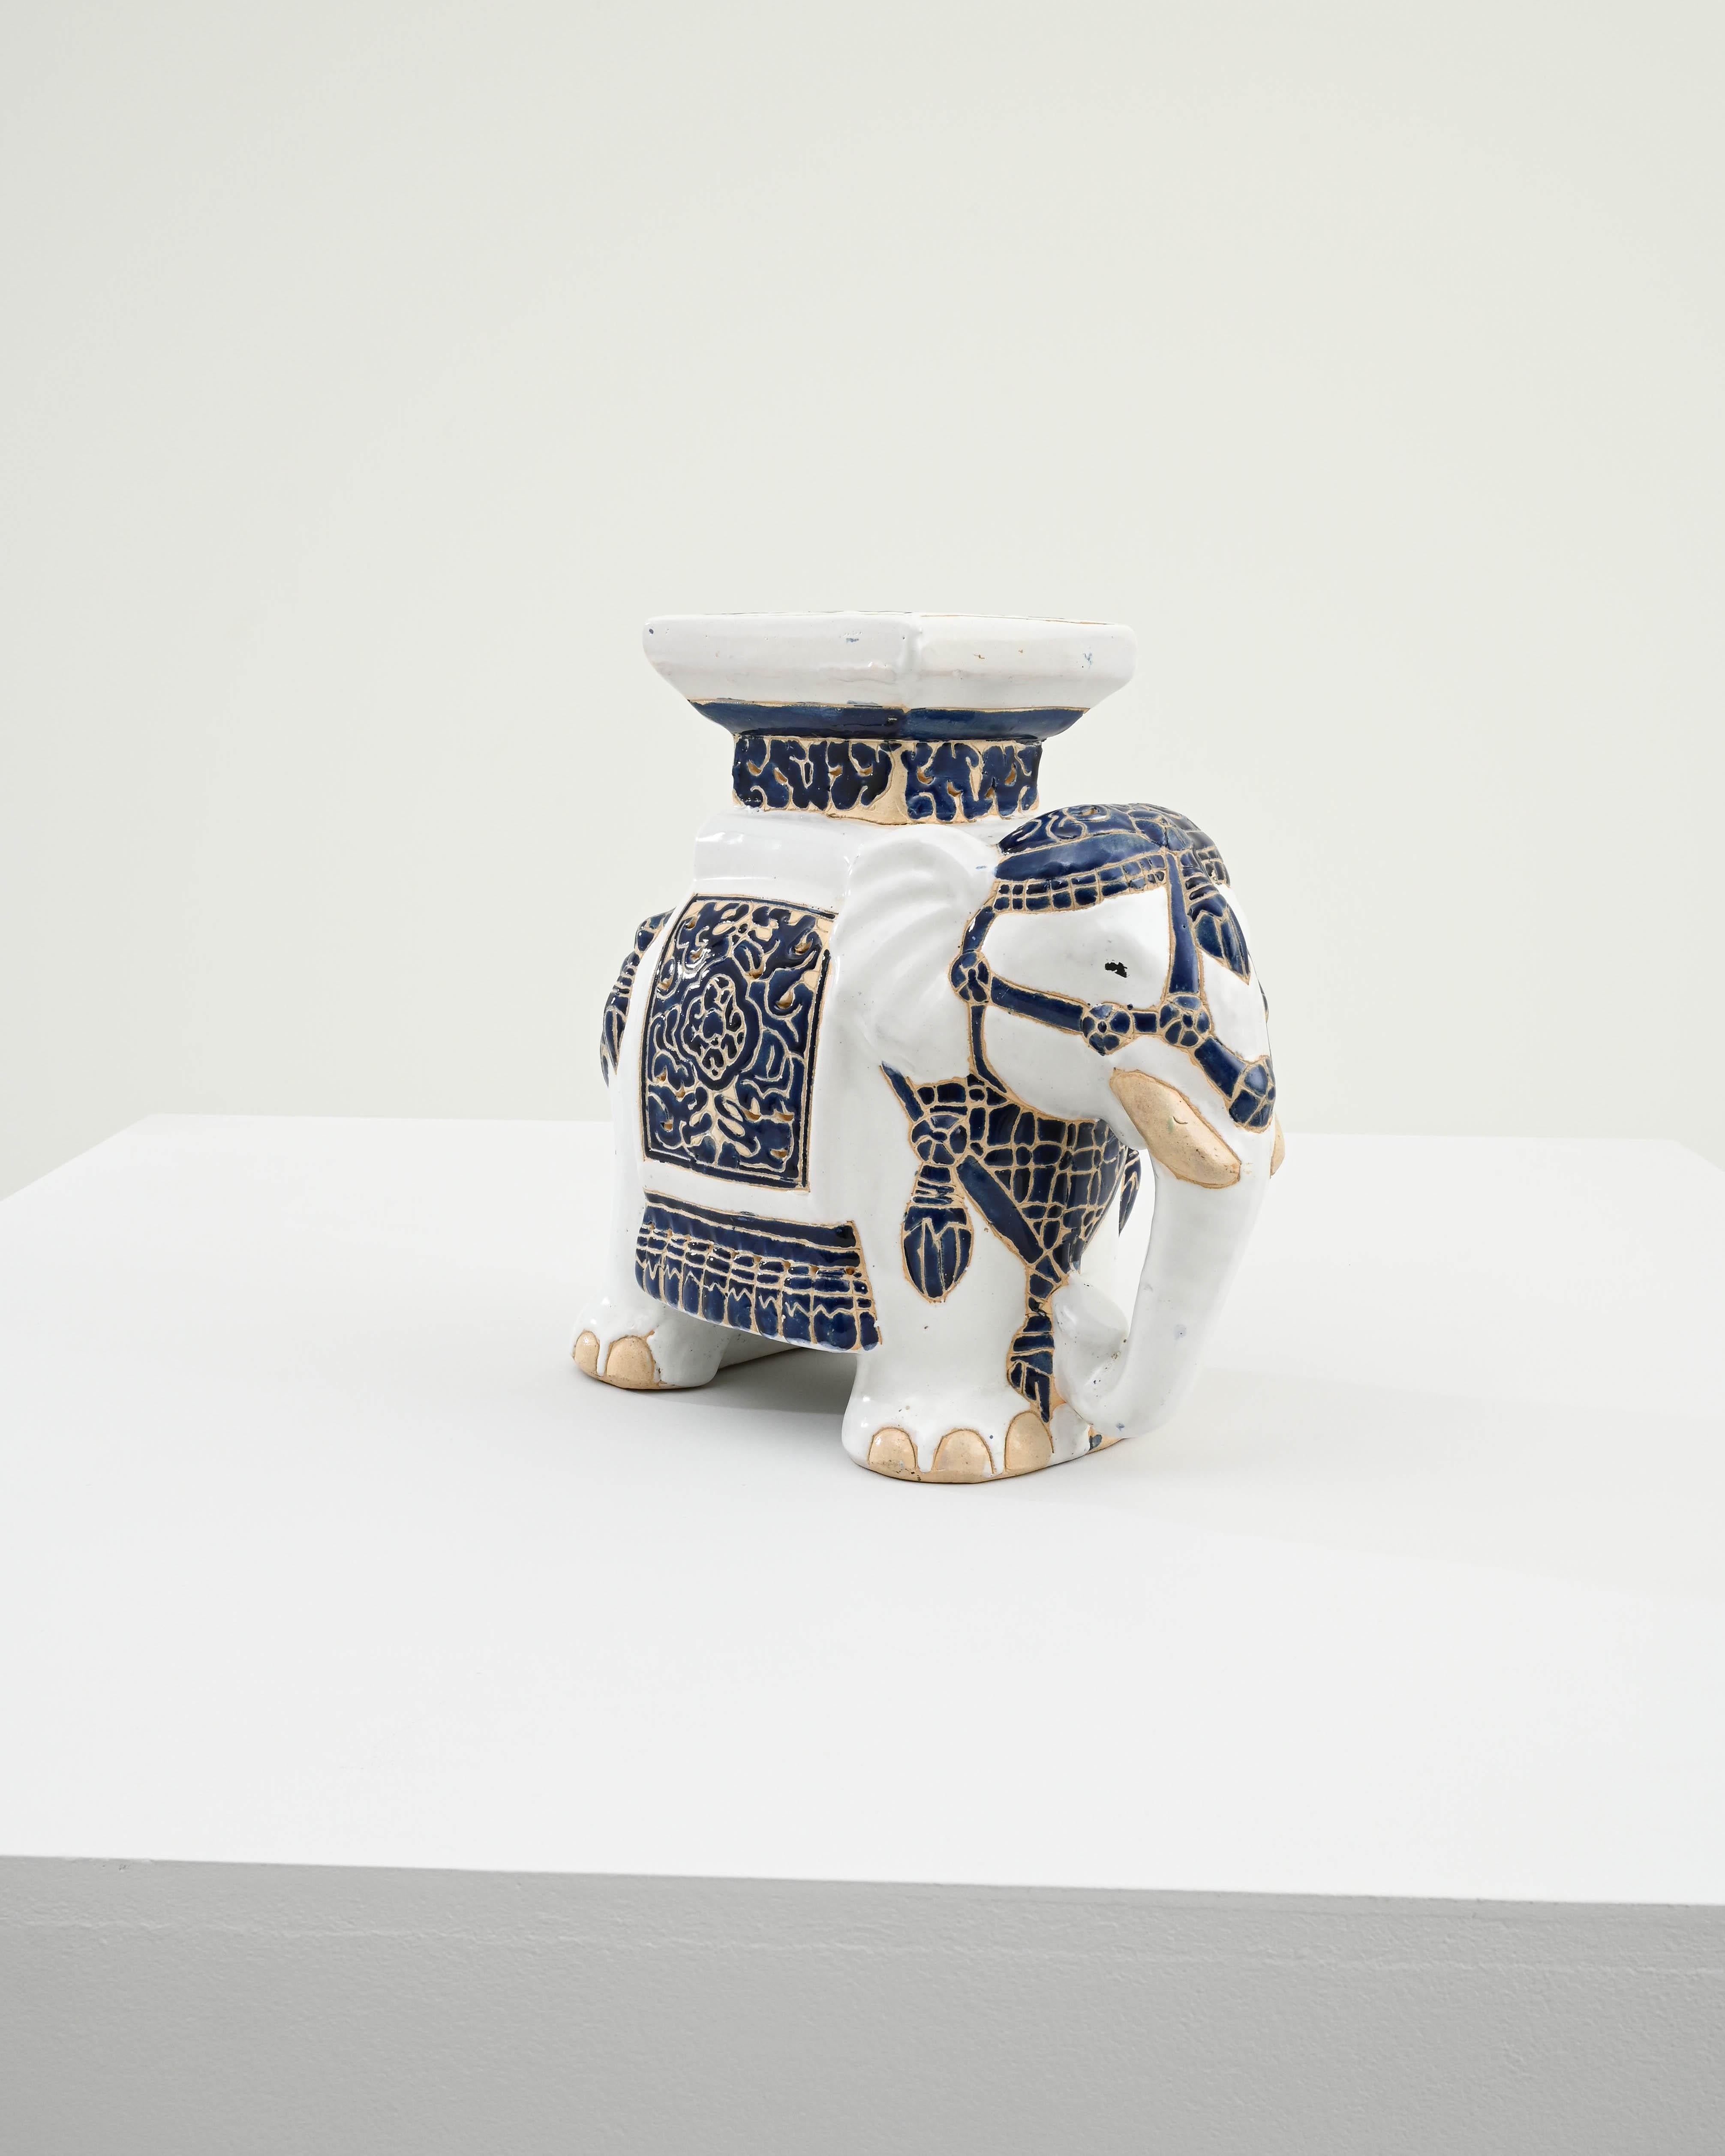 A ceramic decoration from 1960s France in the shape of an elephant. A saddle seat and blanket are glazed with indigo blue, the elephant’s skin painted with glossy white and laced with lines of the earth tone clay body; the assortment of delicate